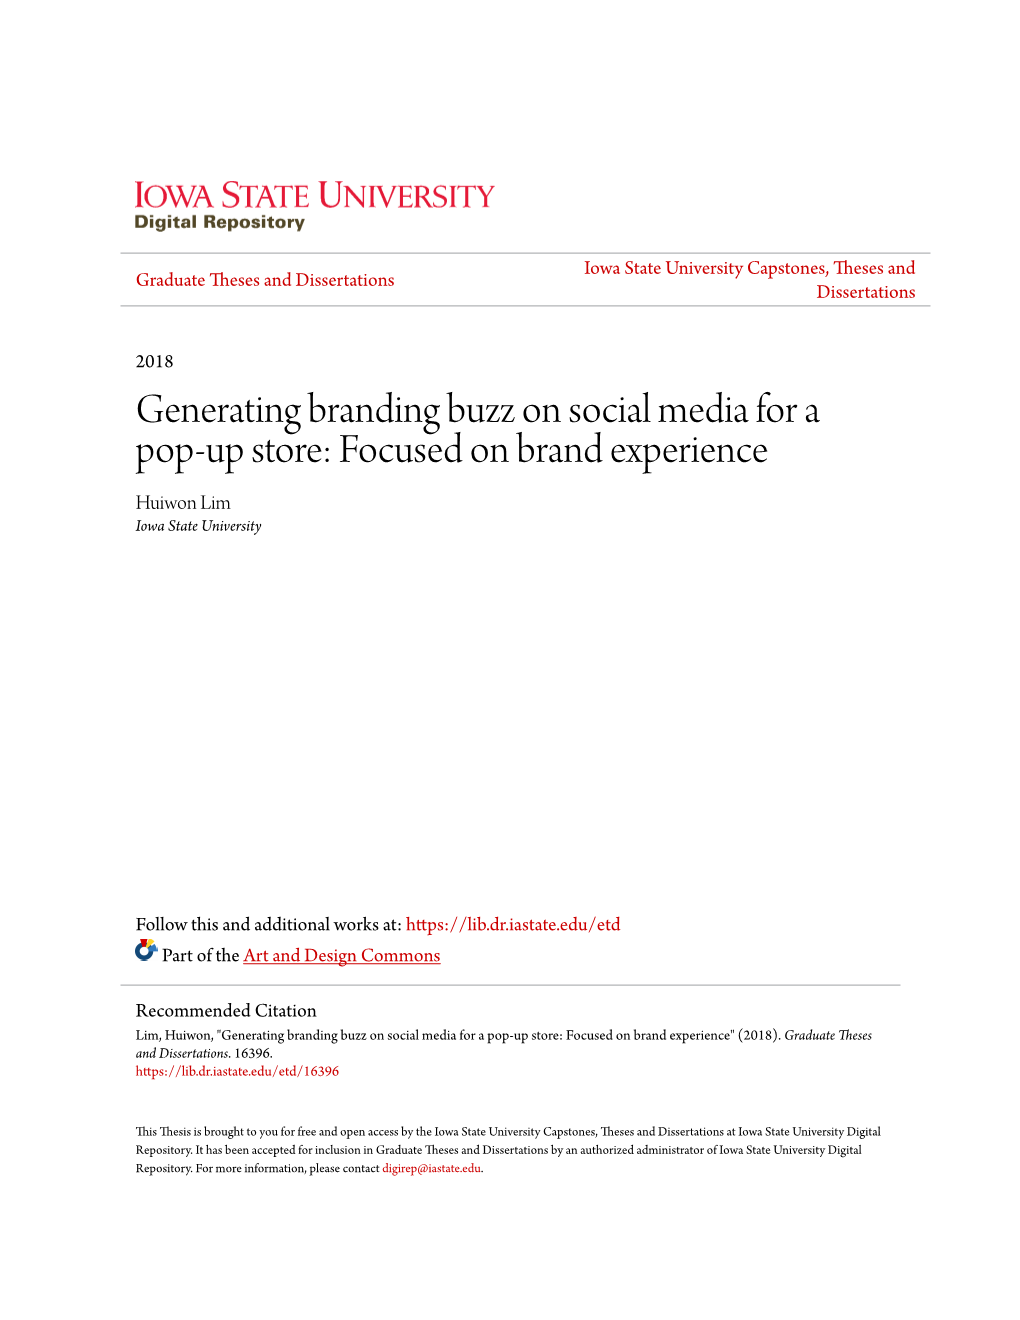 Generating Branding Buzz on Social Media for a Pop-Up Store: Focused on Brand Experience Huiwon Lim Iowa State University